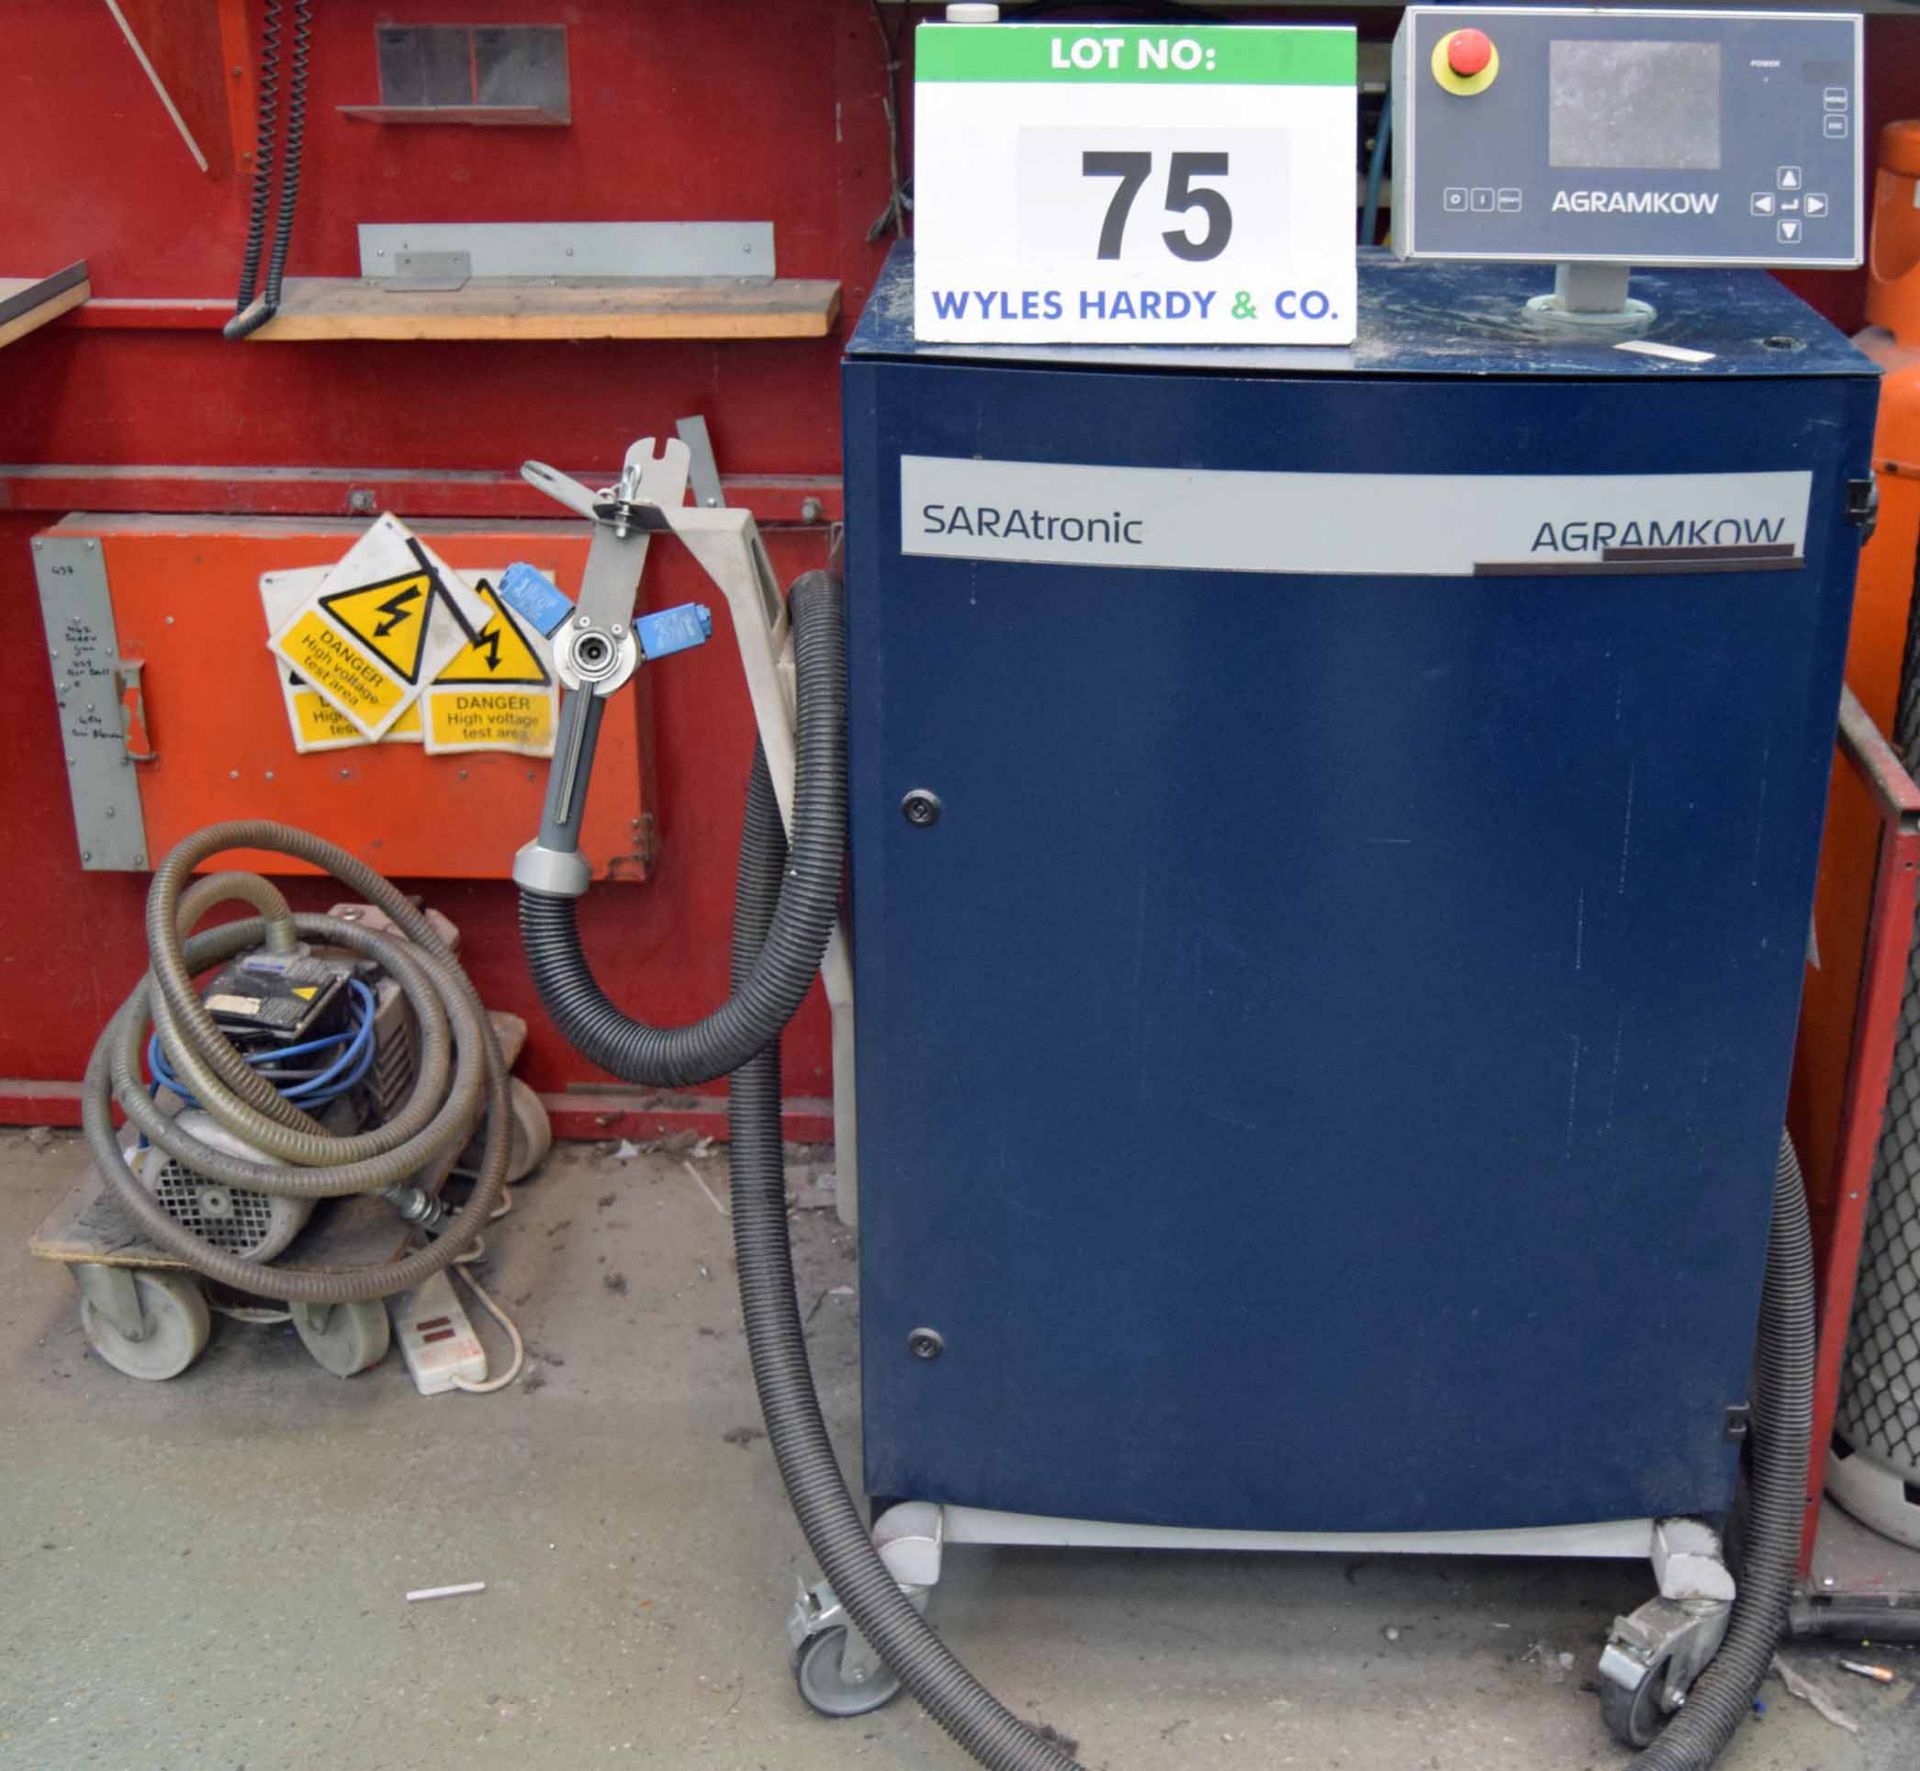 A AGRAMKOW SARAtronic High Perfomance Refrigerant Charging or Evacuation Station complete with